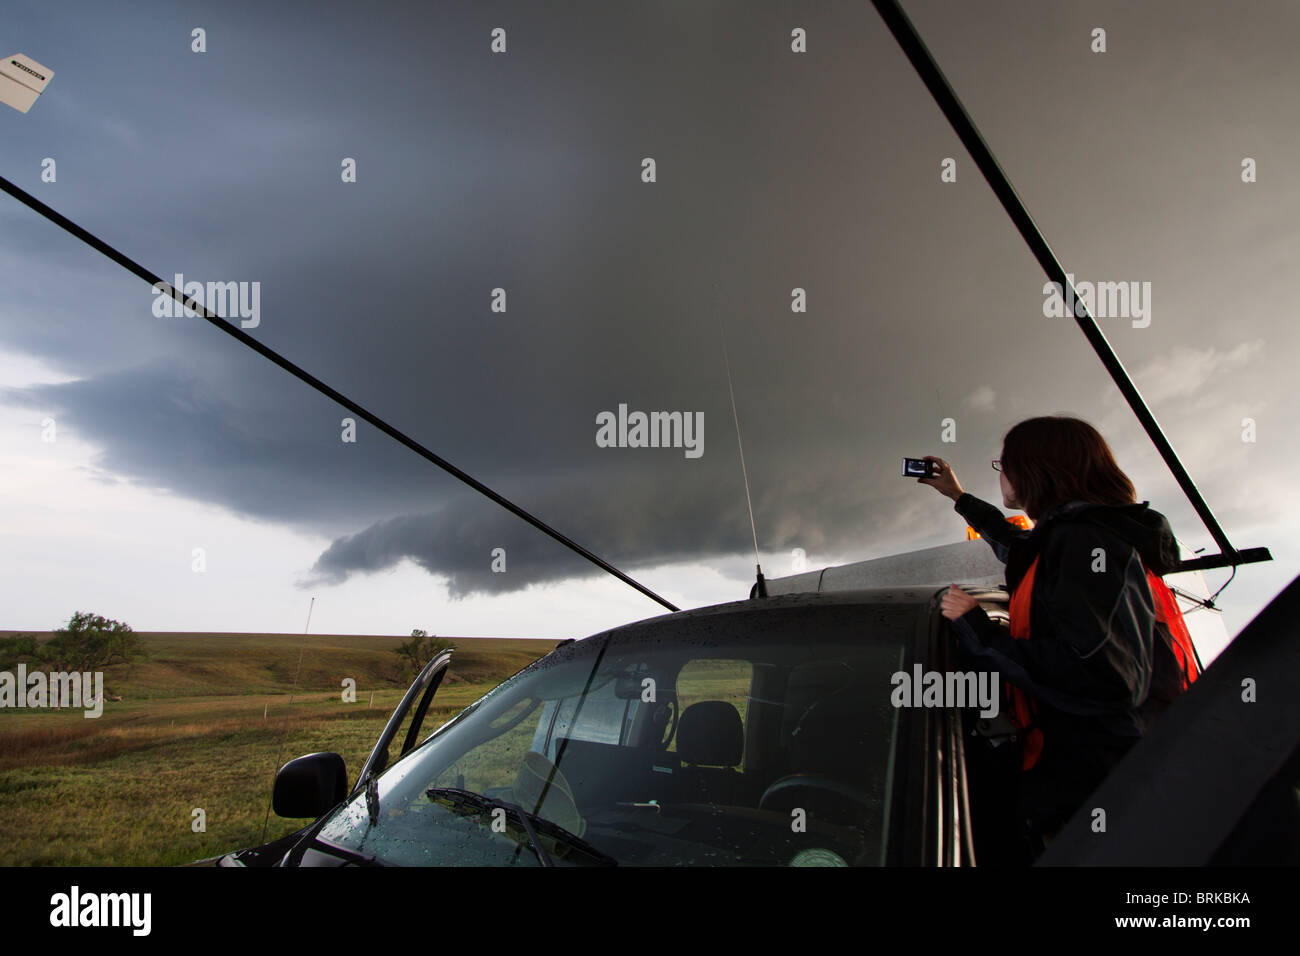 Project Vortex 2 storm chaser Lindsay Bennett watches a storm in Kansas, May 23, 2010. Stock Photo